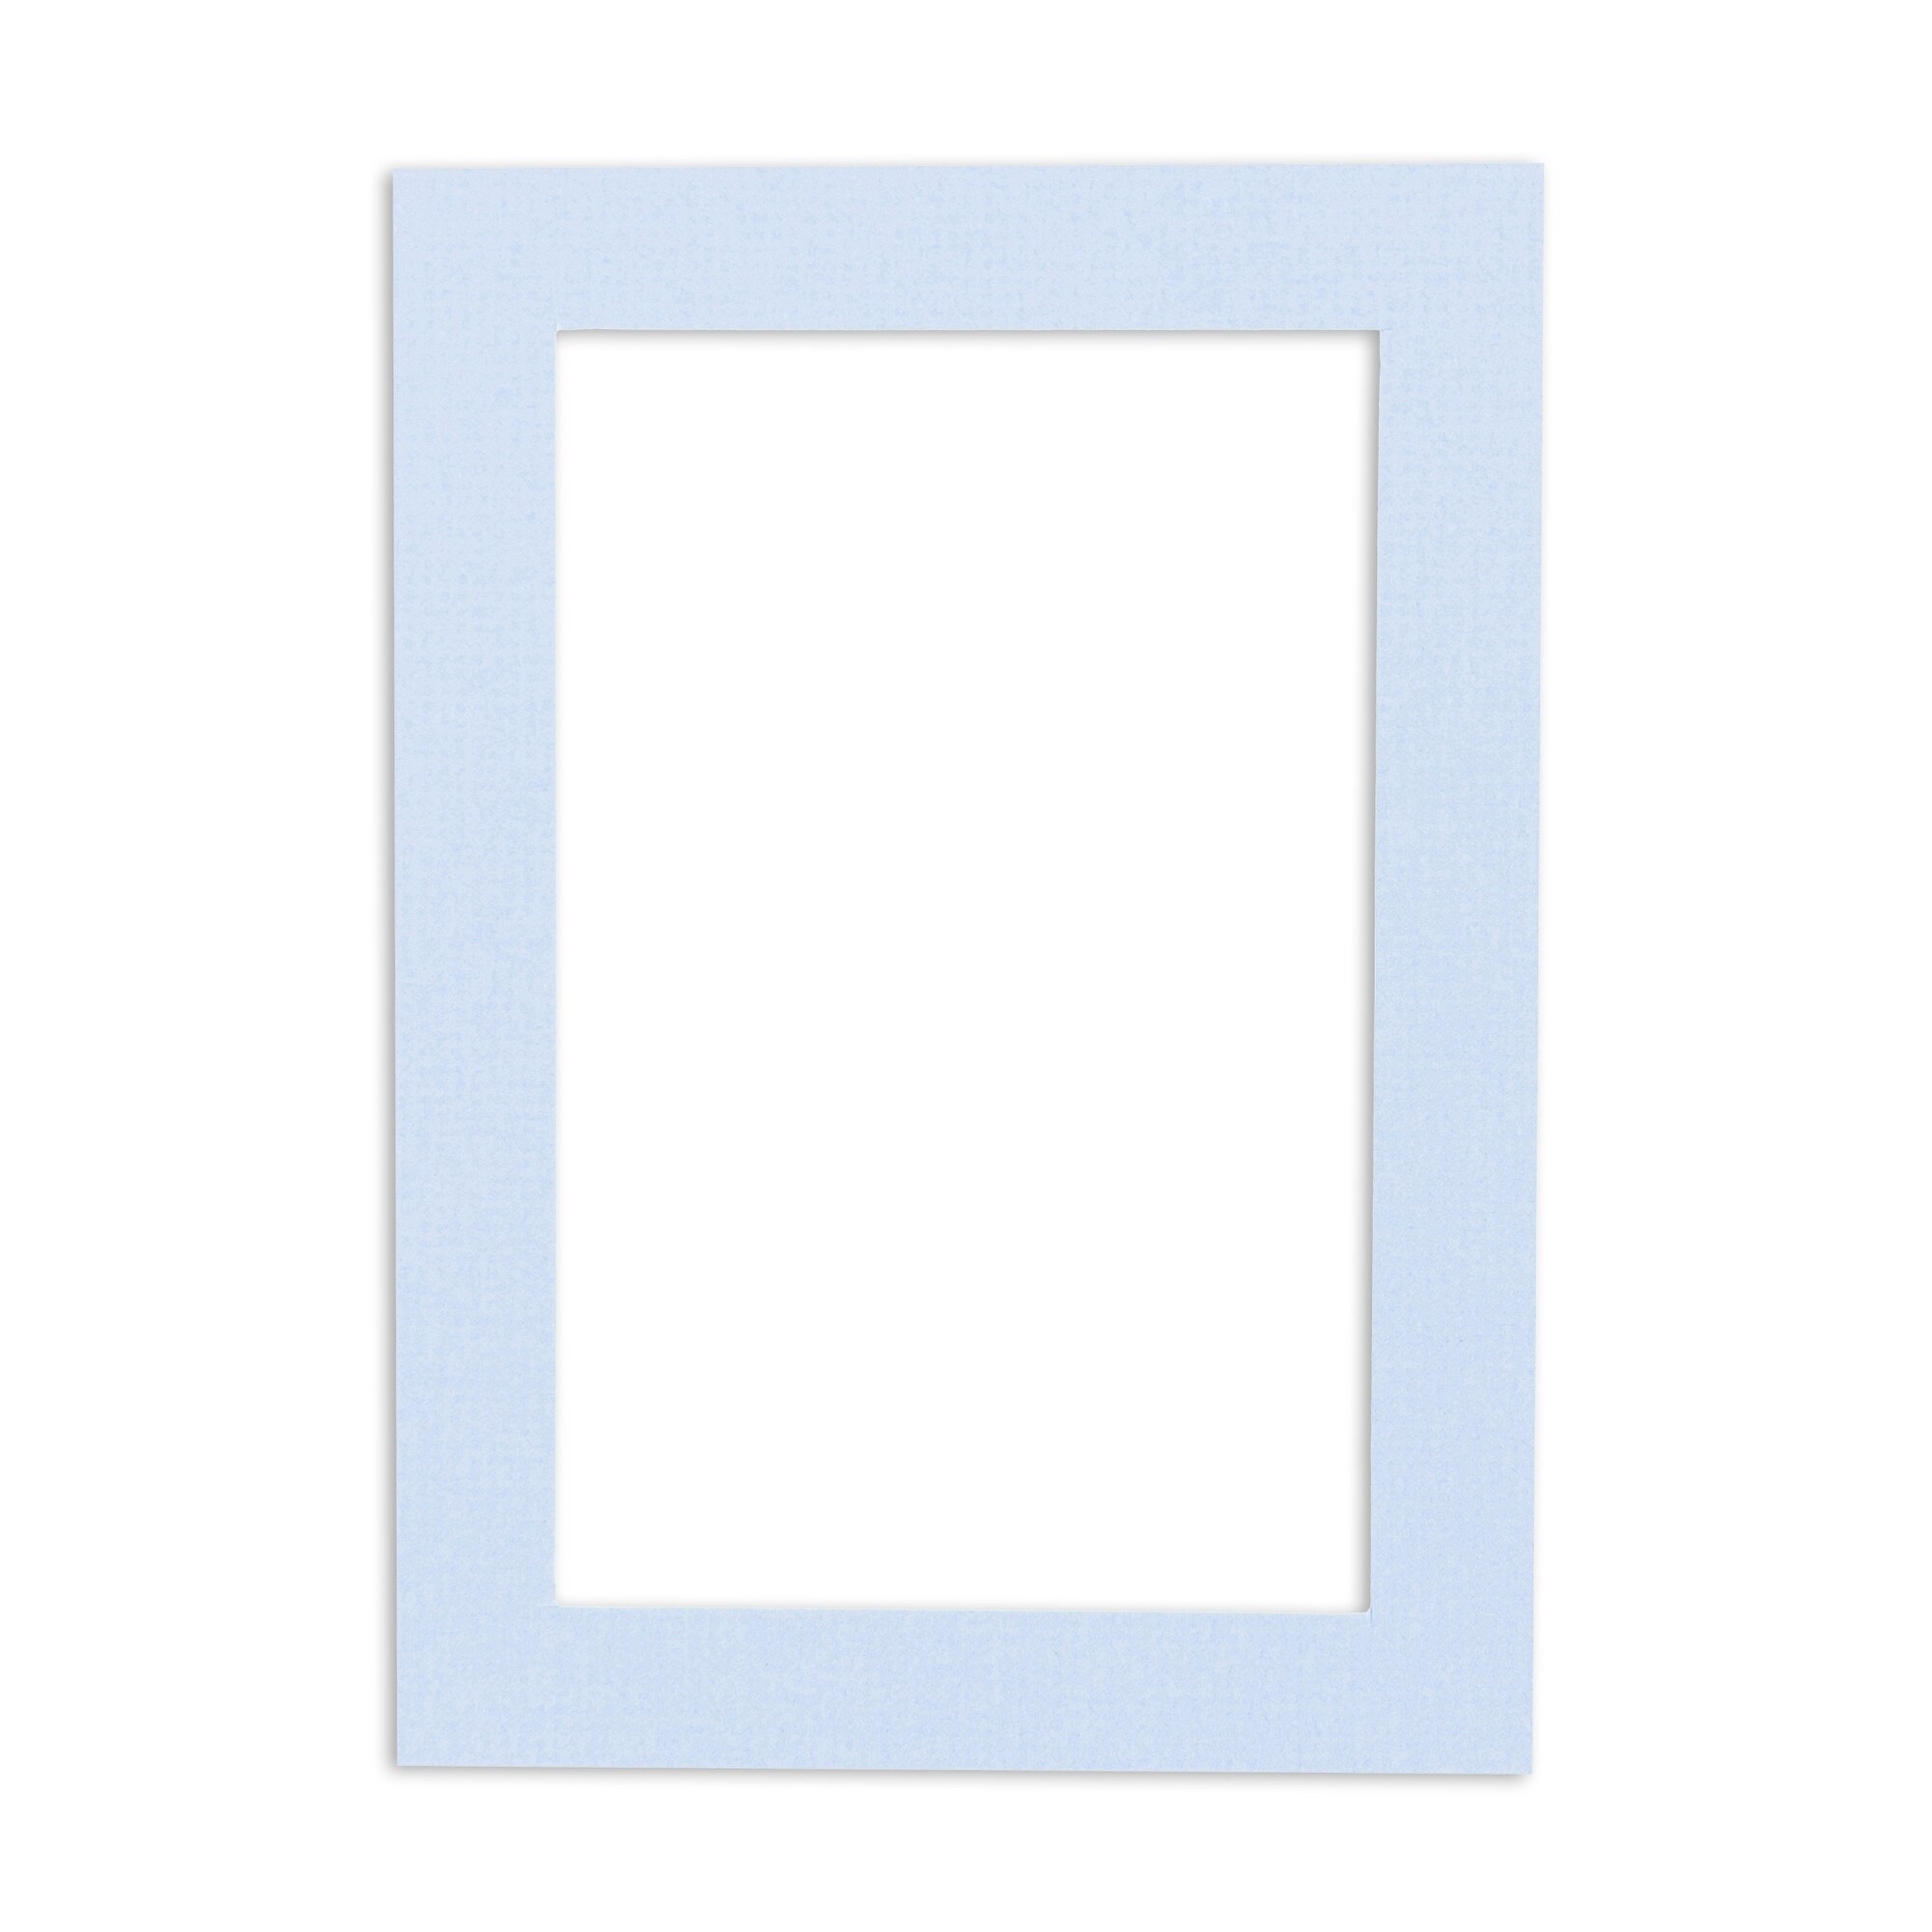 5x7 Mat for 8x10 Frame - Precut Mat Board Acid-Free Teal Blue 5x7 Photo  Matte Made to Fit a 8x10 Picture Frame, Premium Matboard for Family Photos